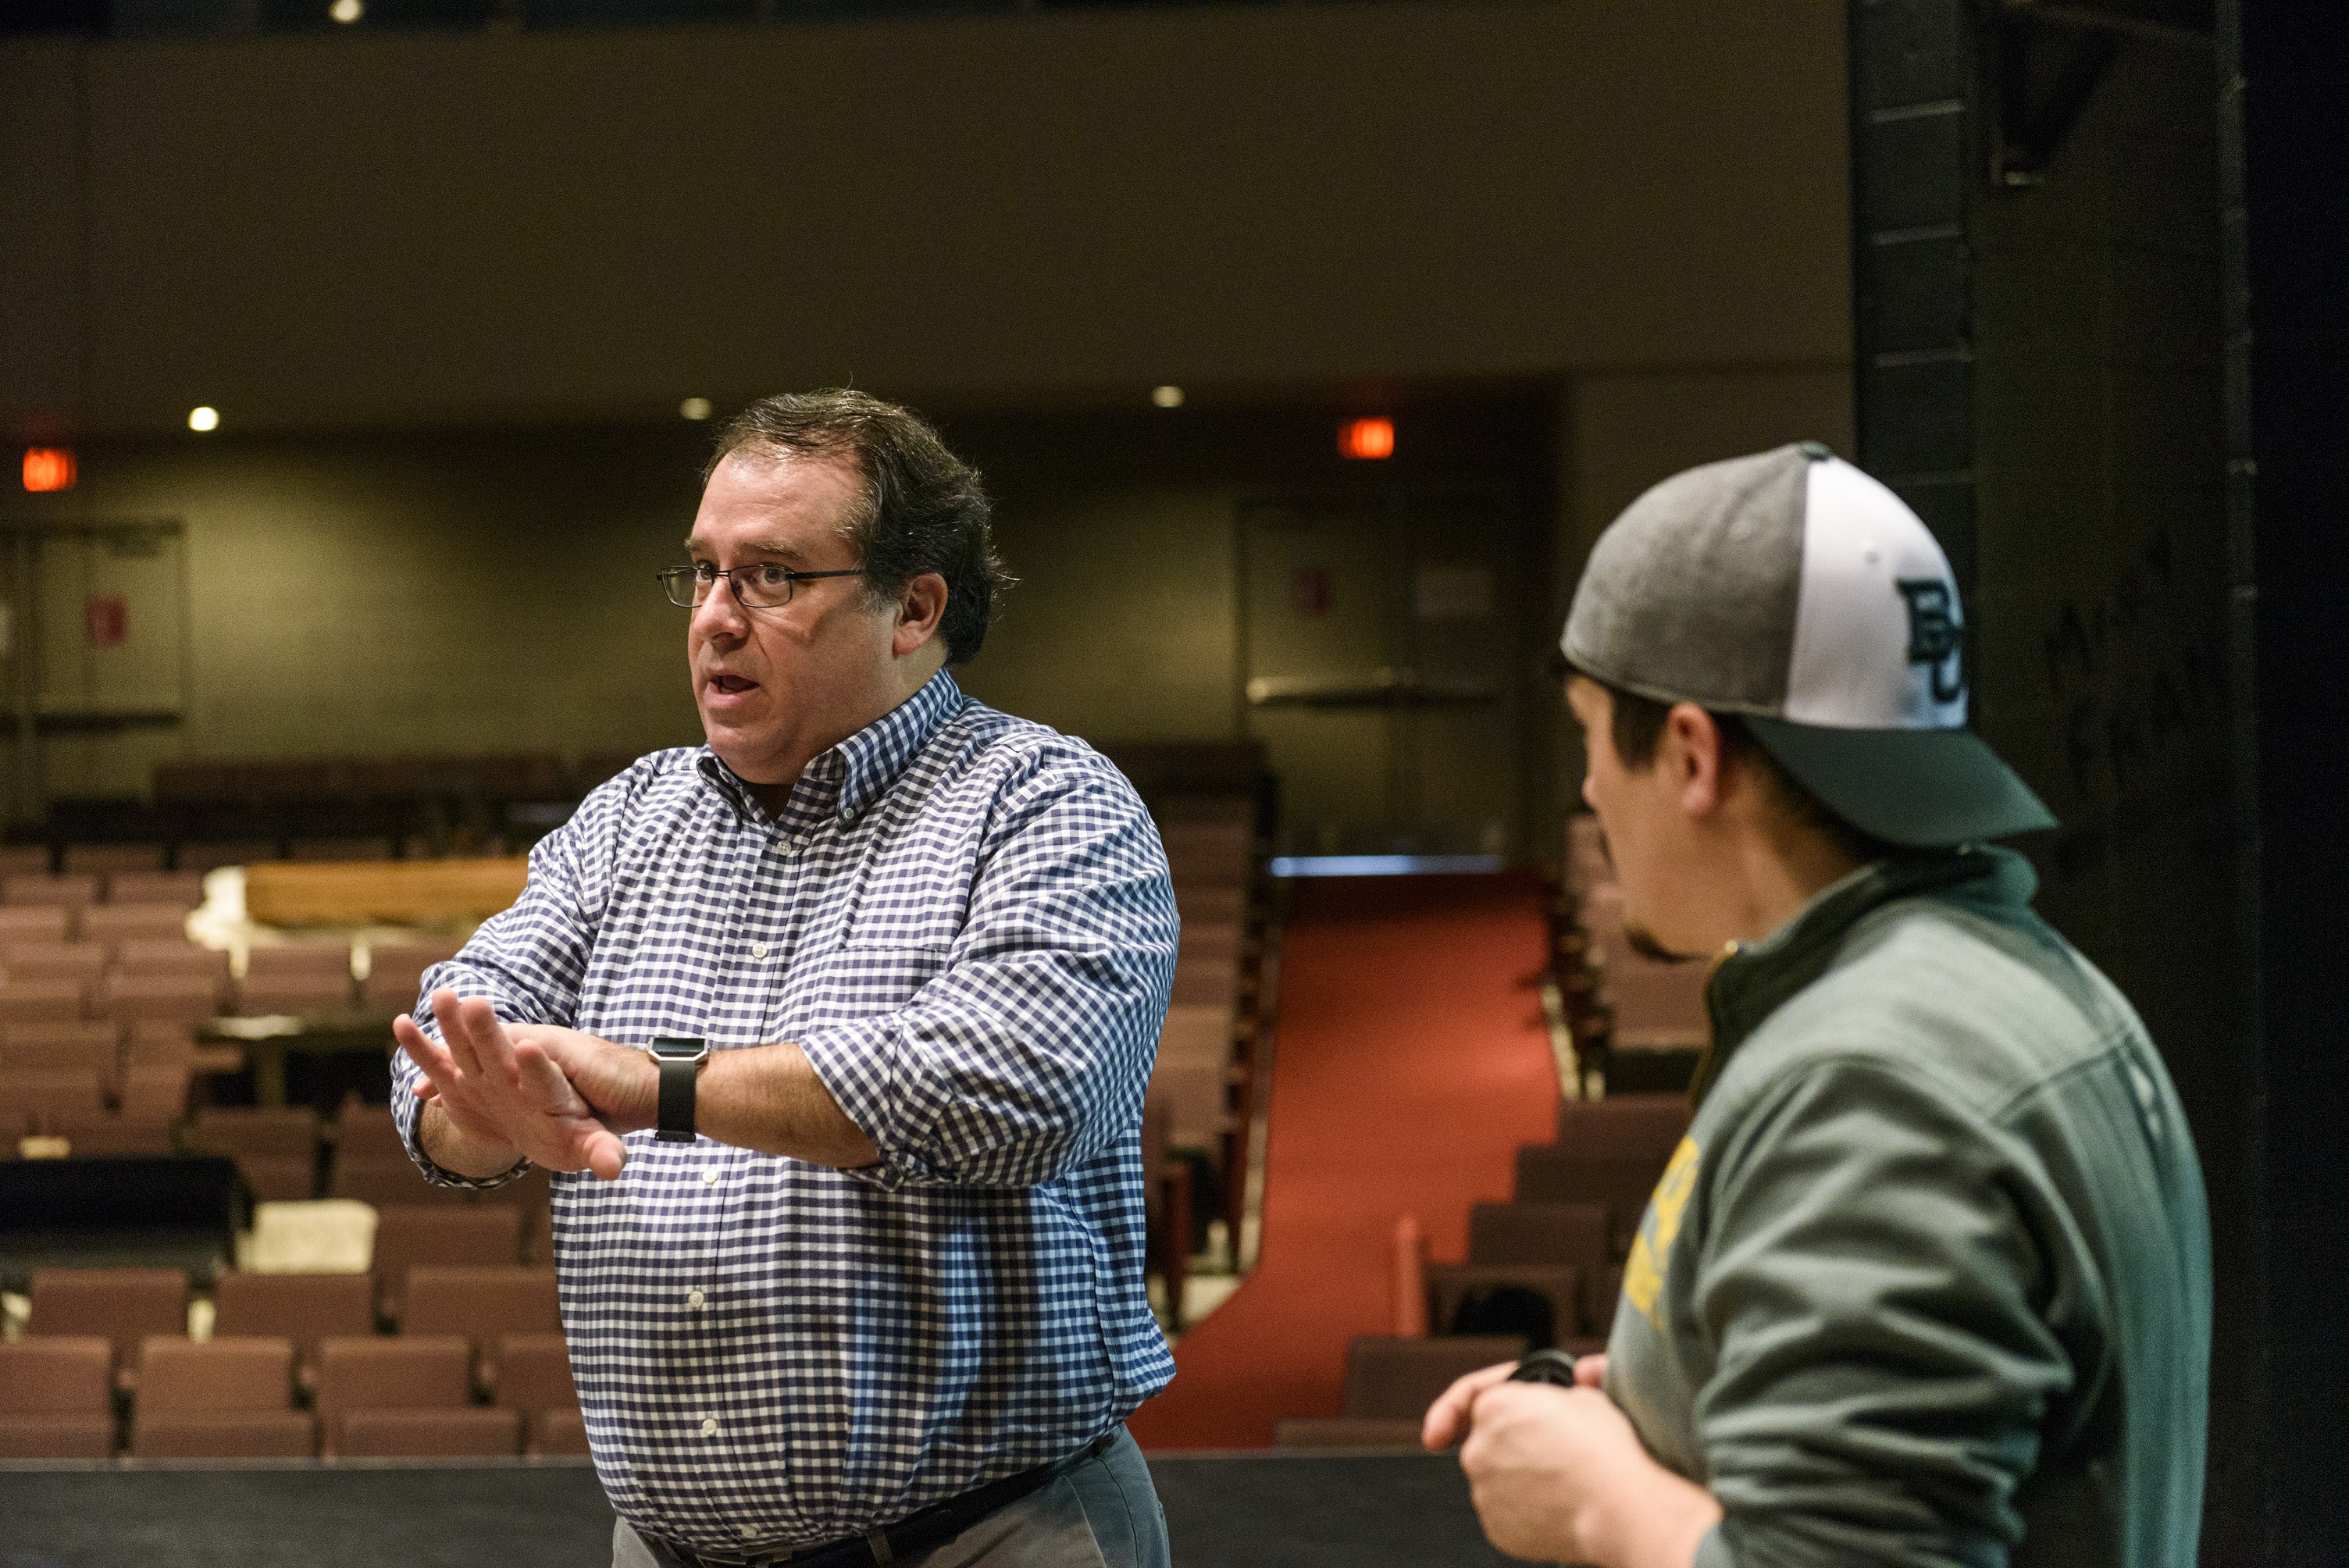 UA’s Story Behind the Story: Q&As with The Philadelphia Story Faculty